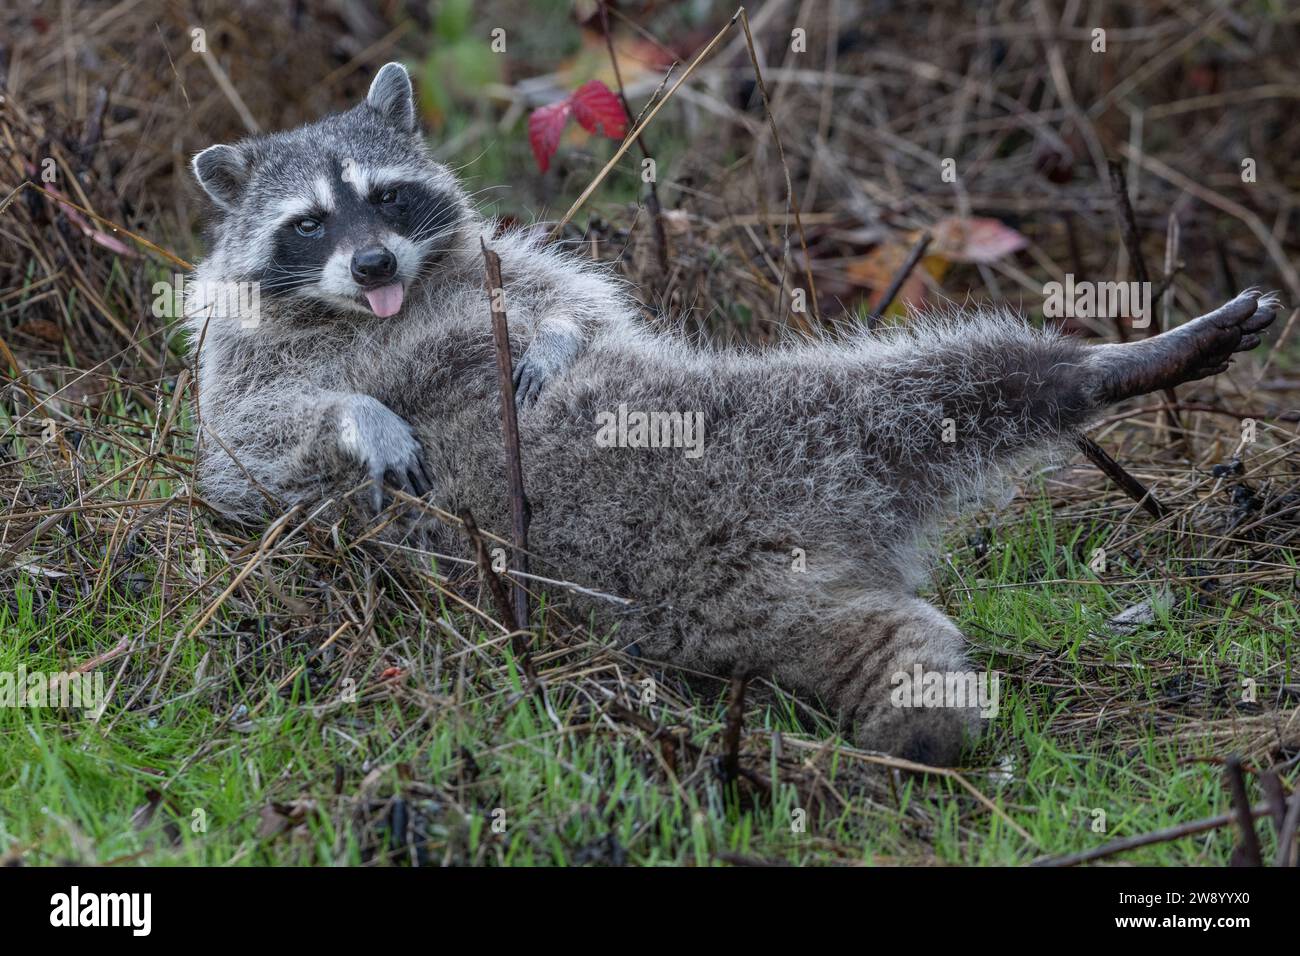 A raccoon, Procyon lotor, rolling over on its back and rubbing its belly with its tongue sticking out in California, USA. Stock Photo